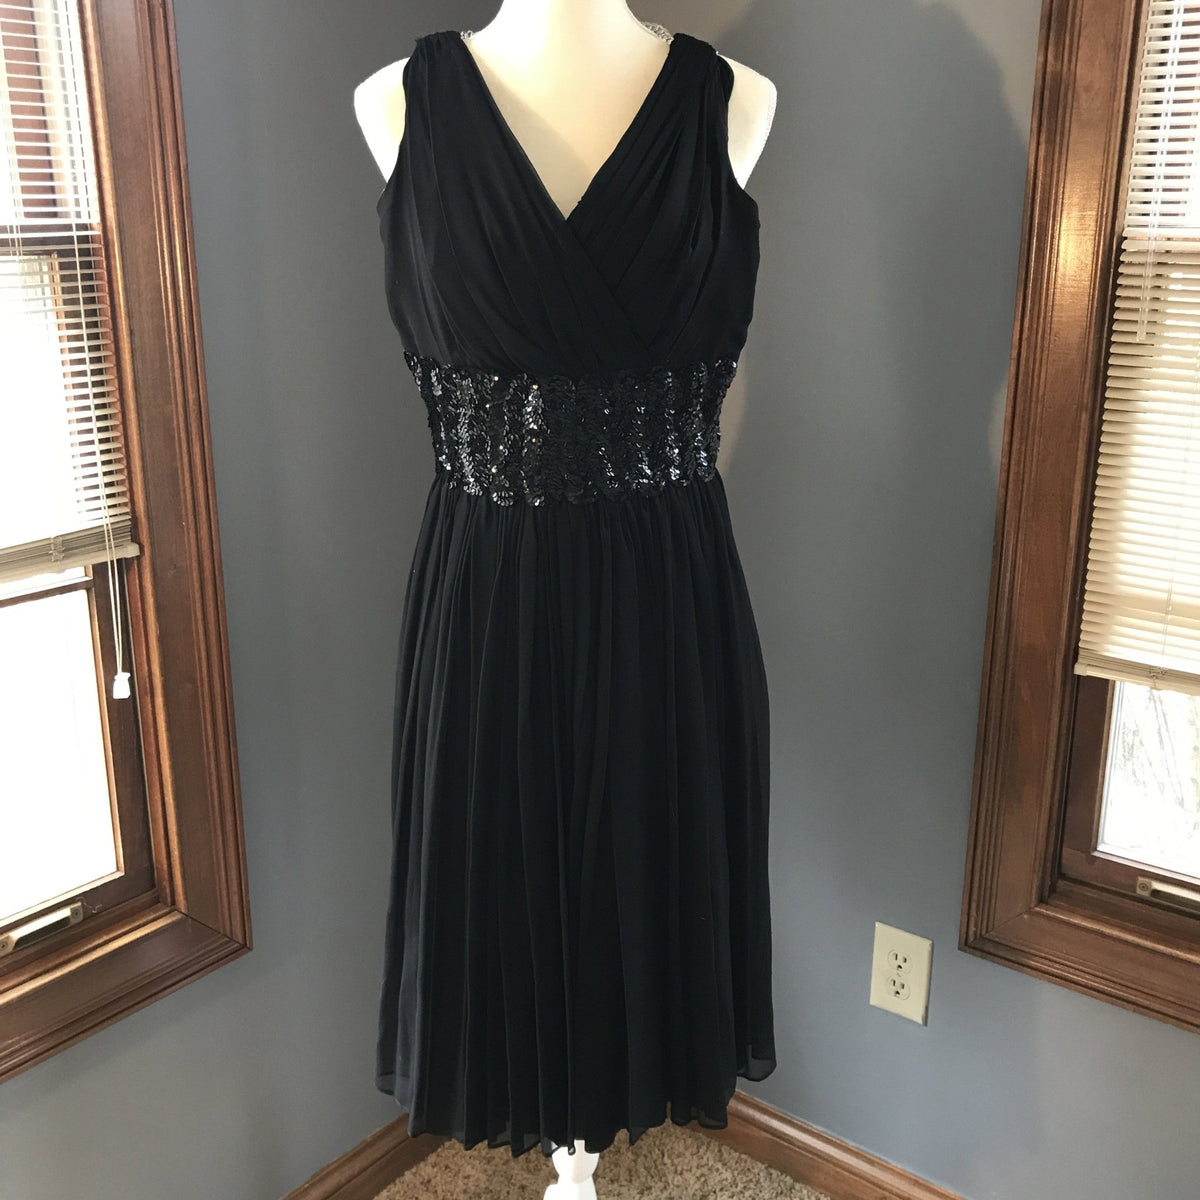 Vintage 1950s Black Chiffon Fit and Flare Dress with Sequin Waist. Per